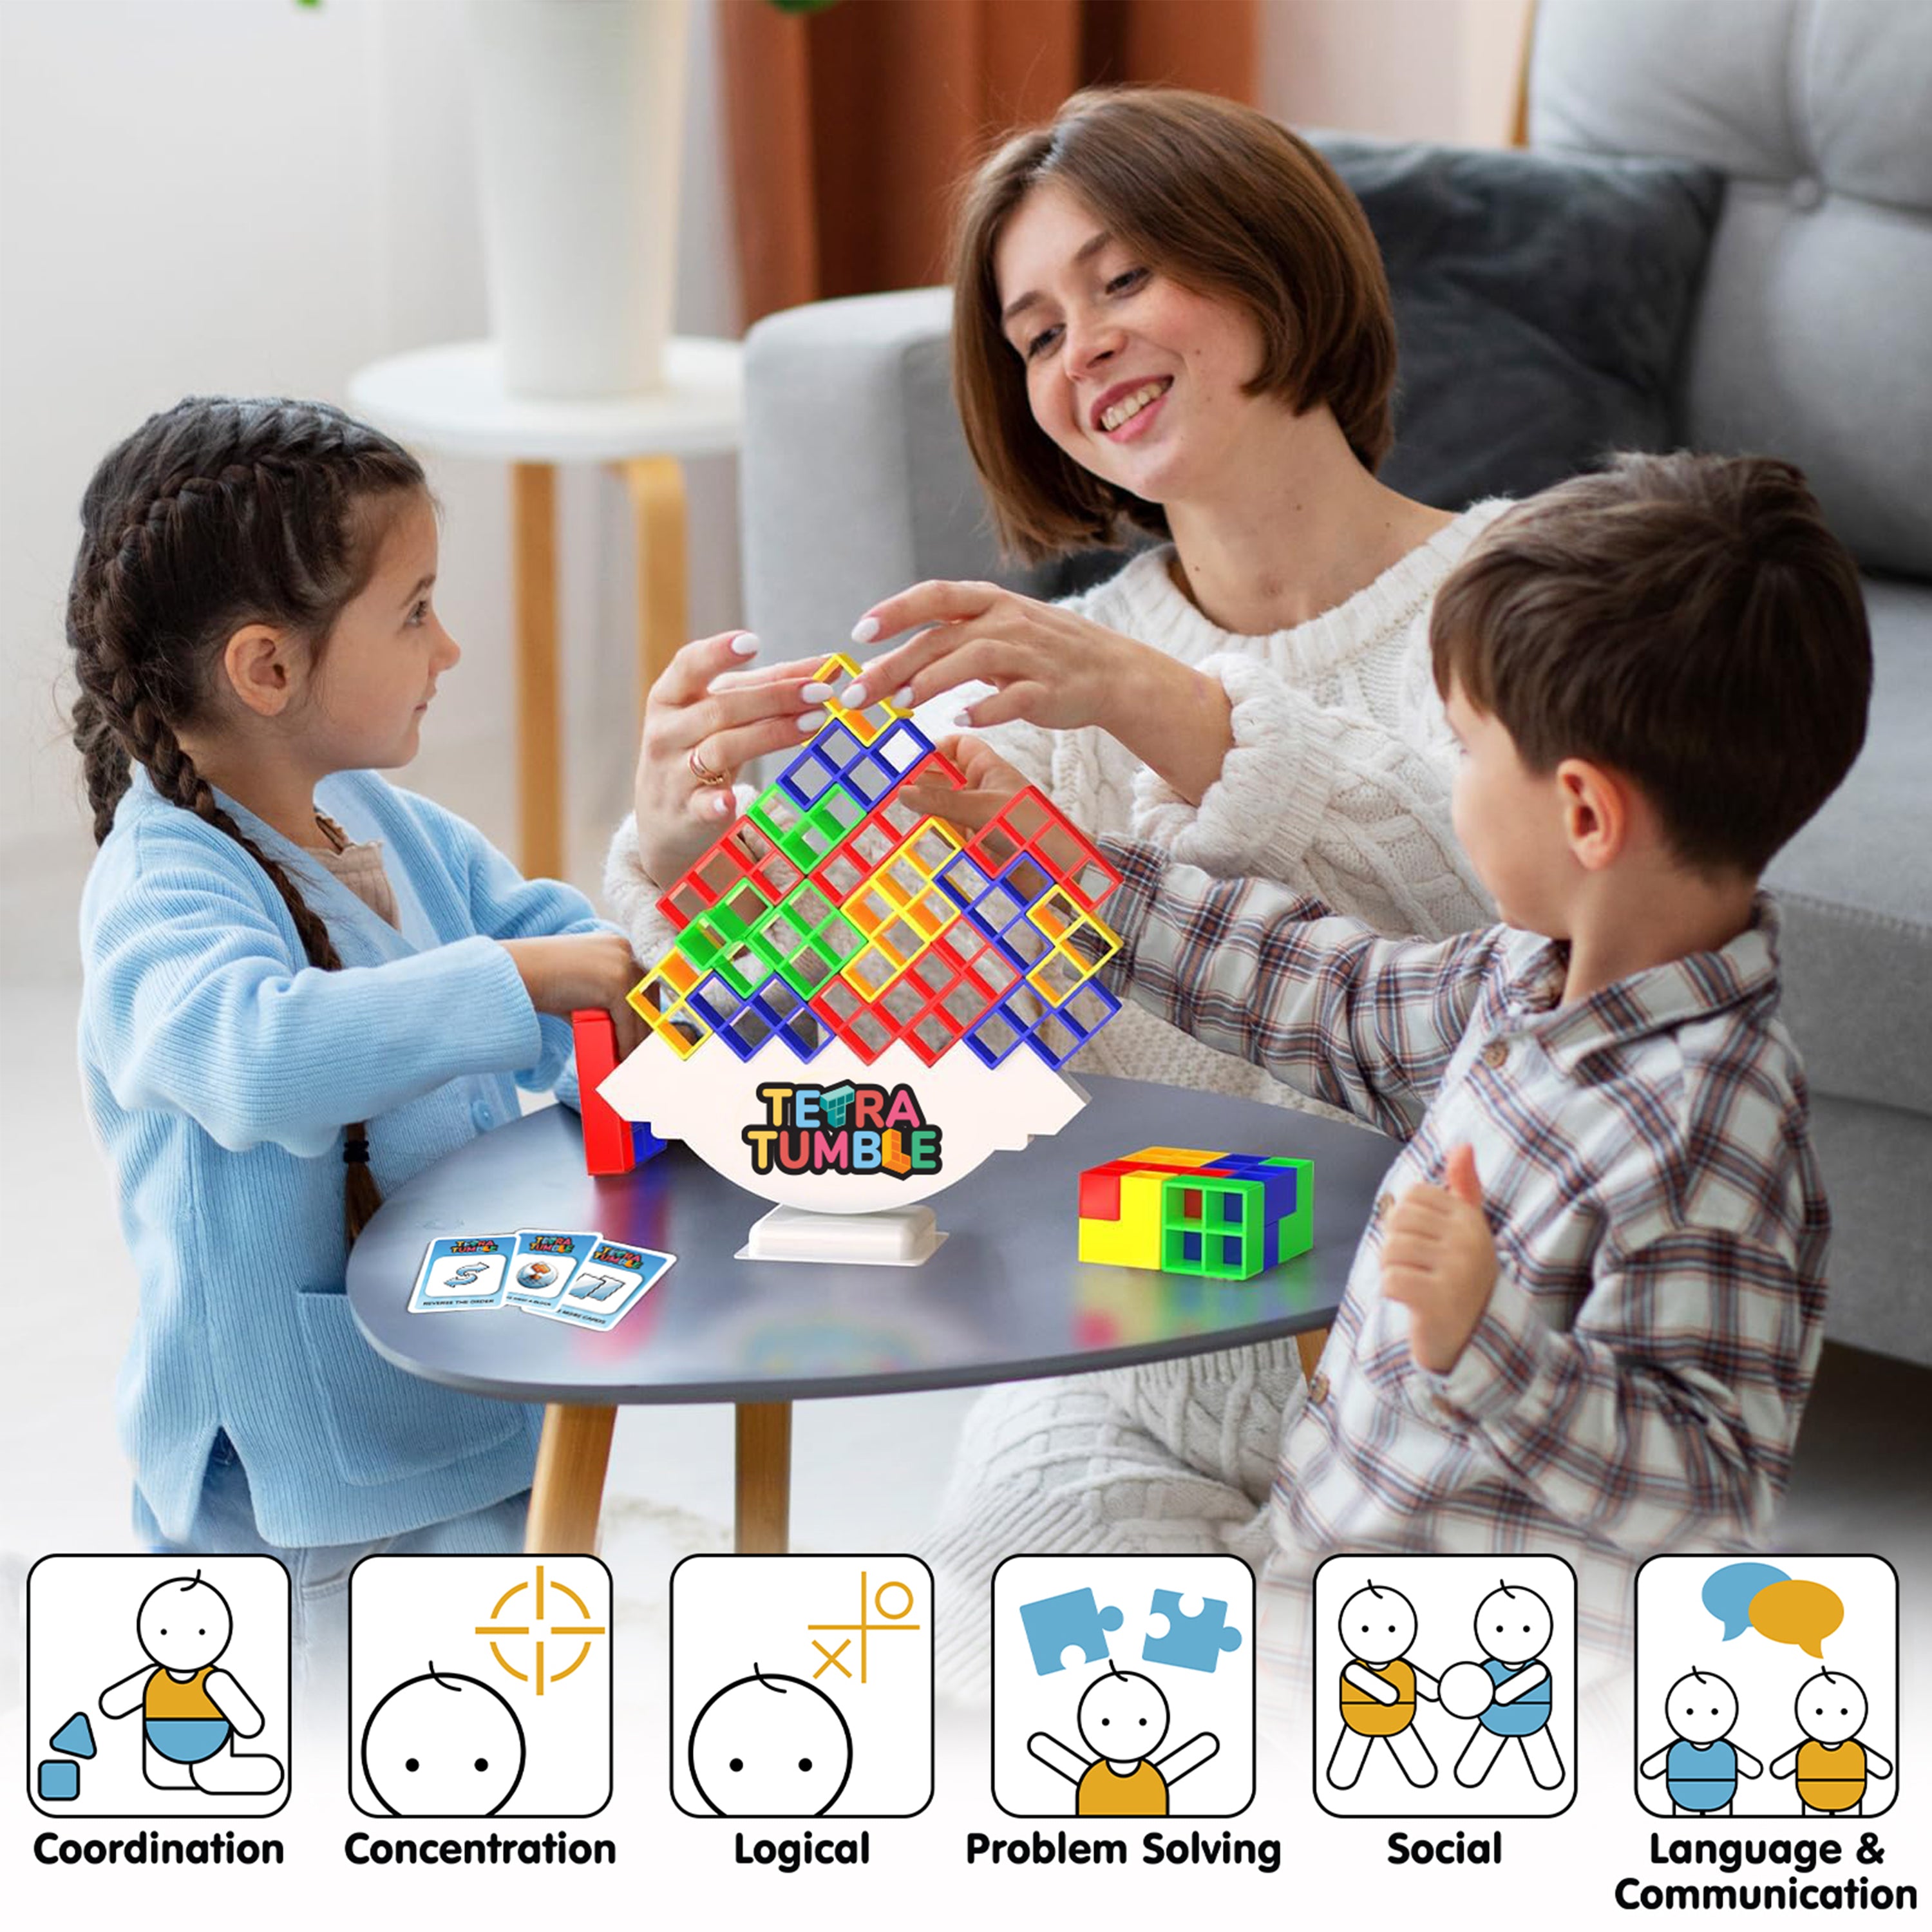 Tygatec 32 Pcs Tetra Tower Stacking Blocks Balance Game, Family Board Games for Kids & Adults-Balancing Stacking Toys Building Blocks for Parties, Travel 【Multi-Colored】